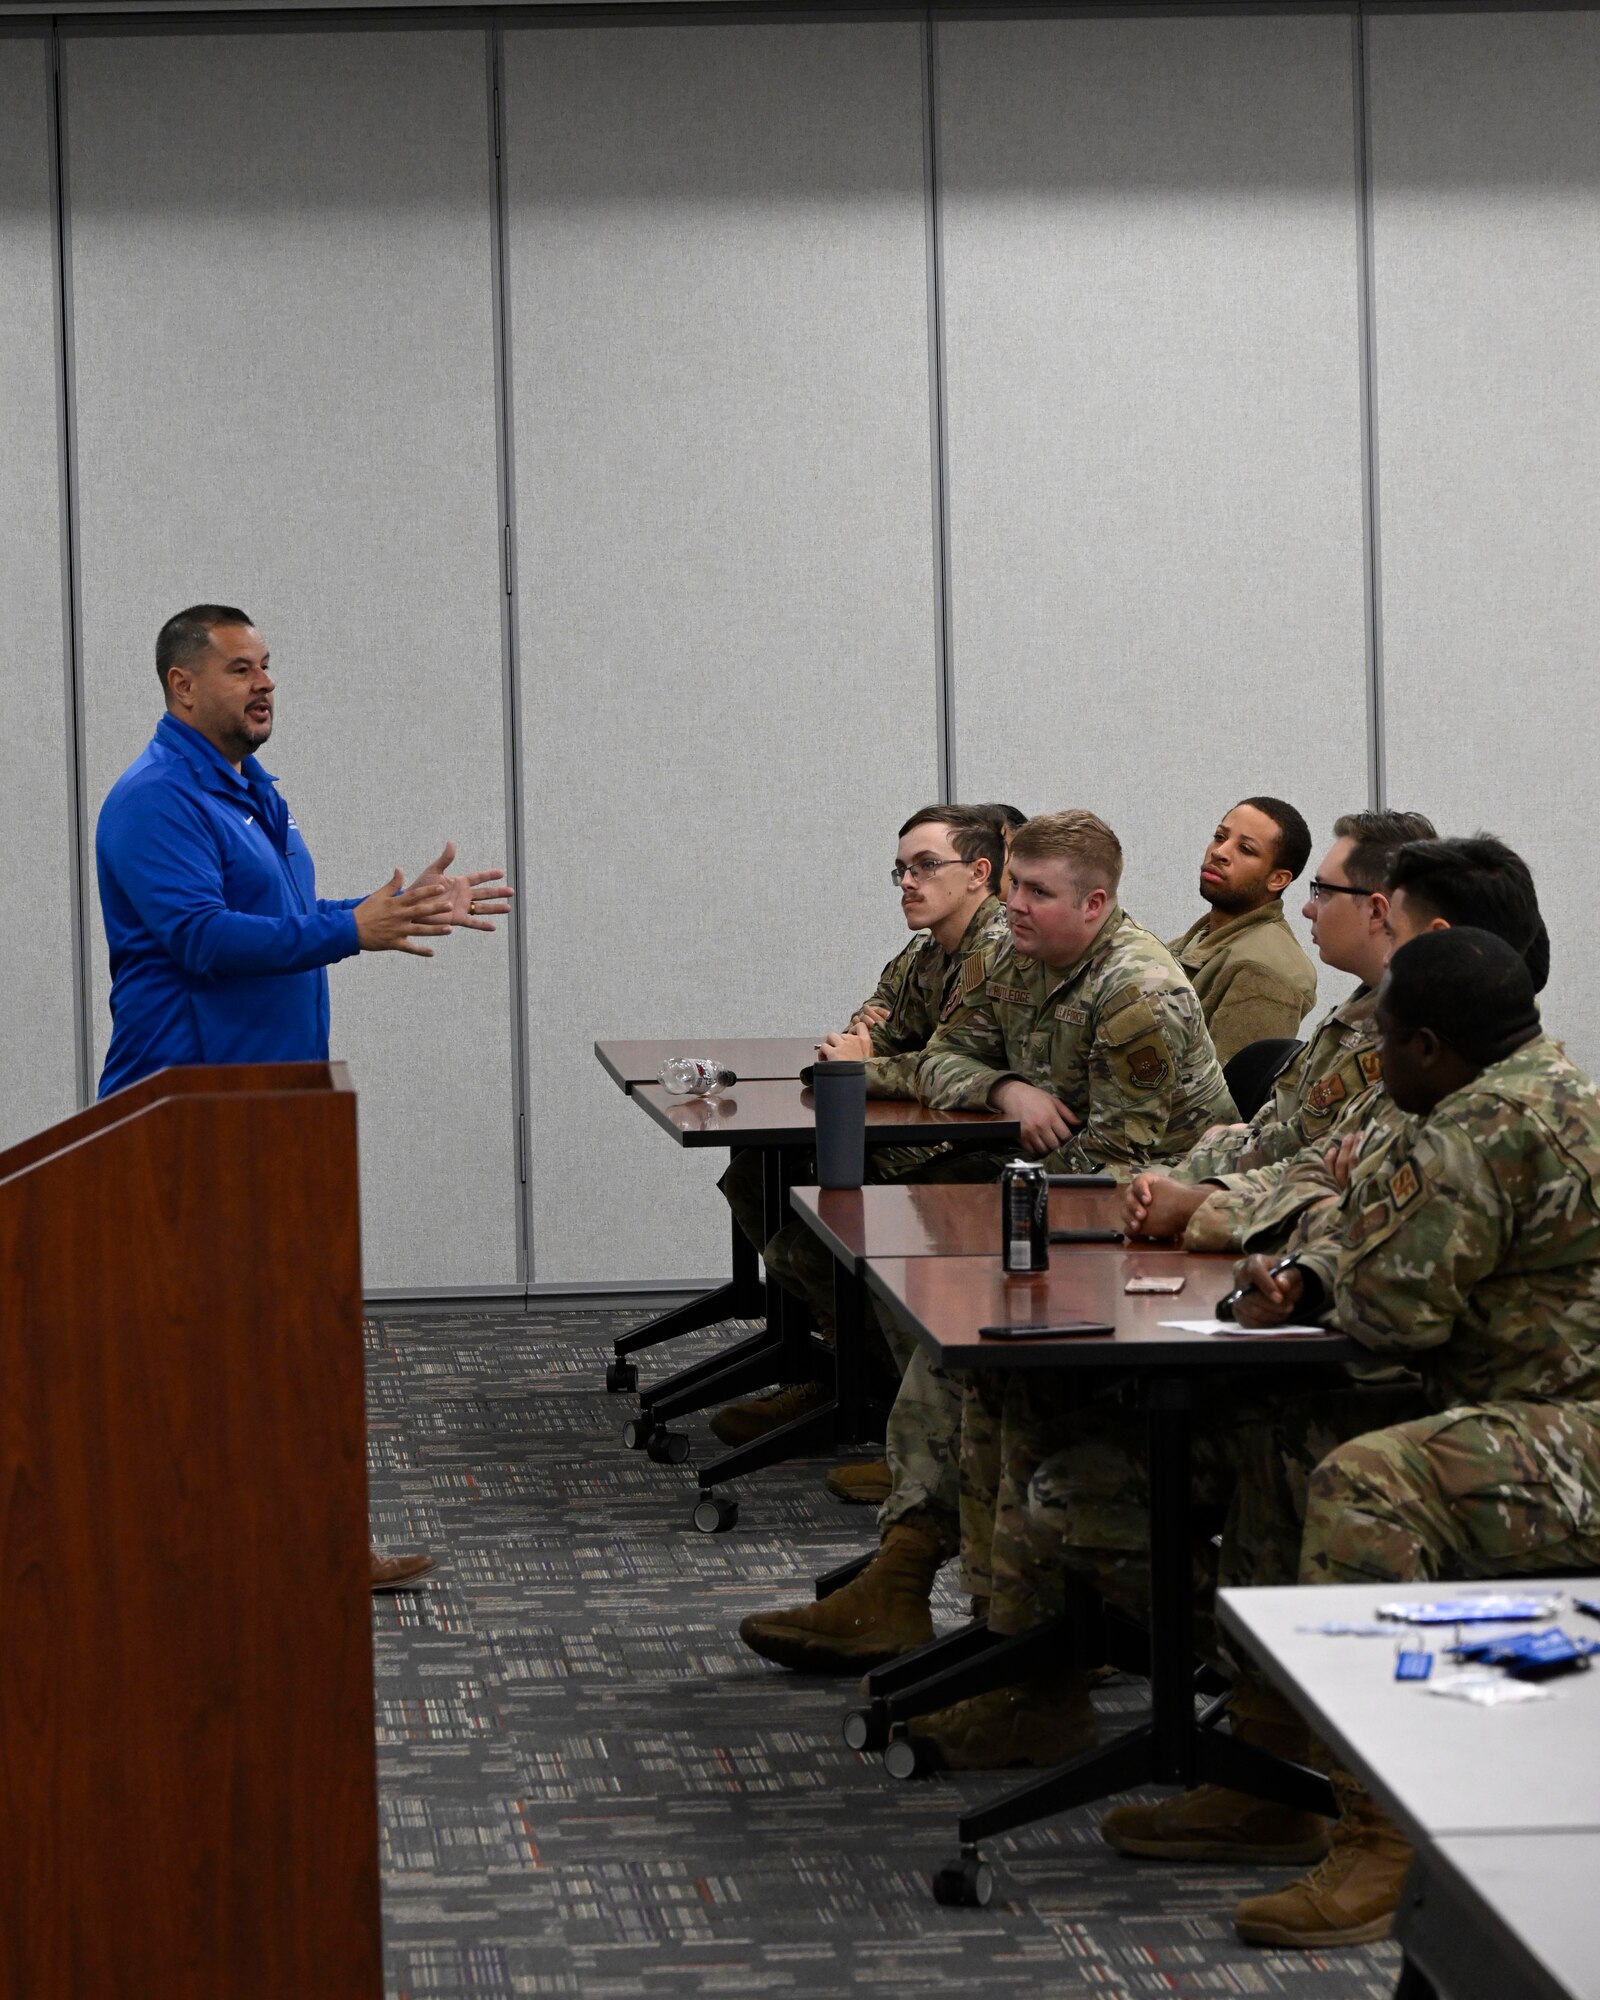 Senior Master Sgt. (Ret.) Carlos Villarreal, outreach ambassador coordinator for Air Force Wounded Warrior Program (AFW2), speaks to Airmen from the 791st Security Forces Squadron Monday Aug. 21, 2023 at Minot Air Force Base, North Dakota. The AFW2 team visits CONUS bases to tell their stories of resiliency and experiences. (U.S. Air Force photo by Senior Airman Caleb S. Kimmell)